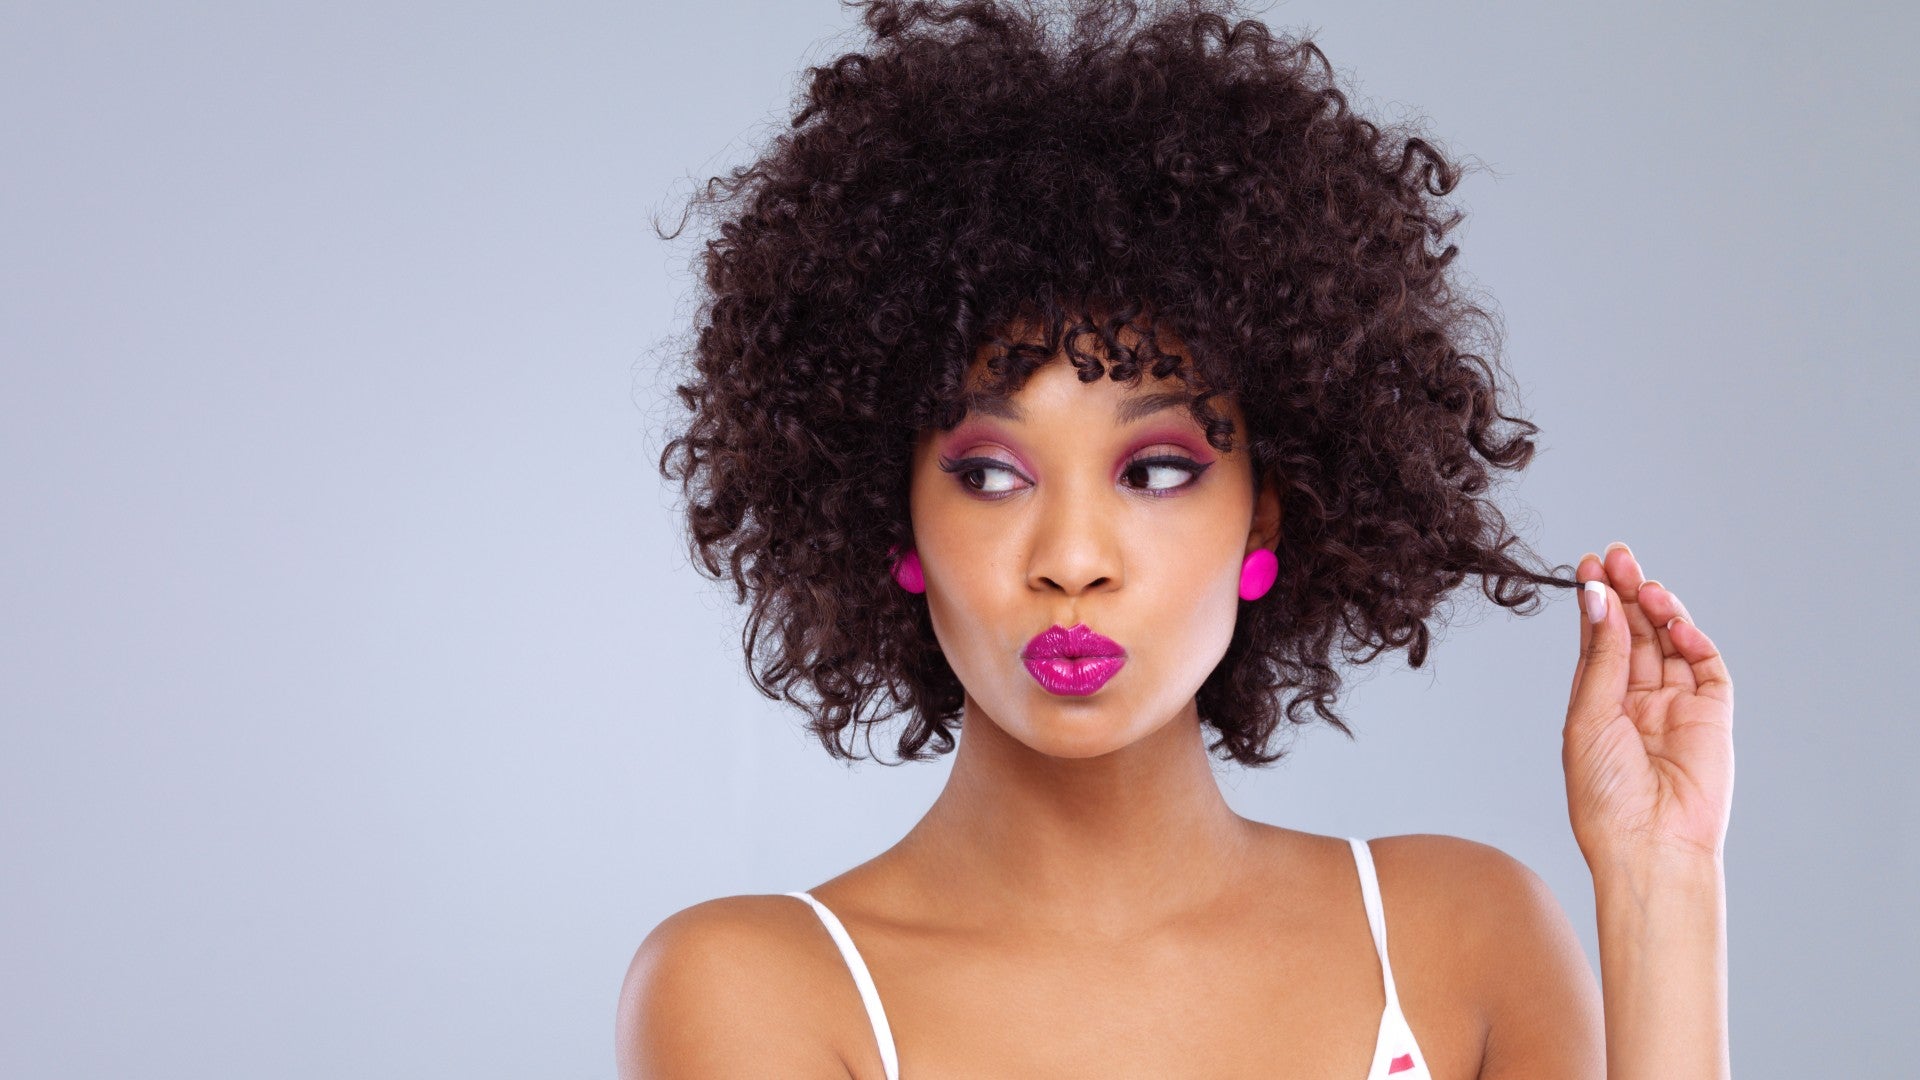 5 Creative Ways To Do Pink Beauty For Breast Cancer Awareness Month